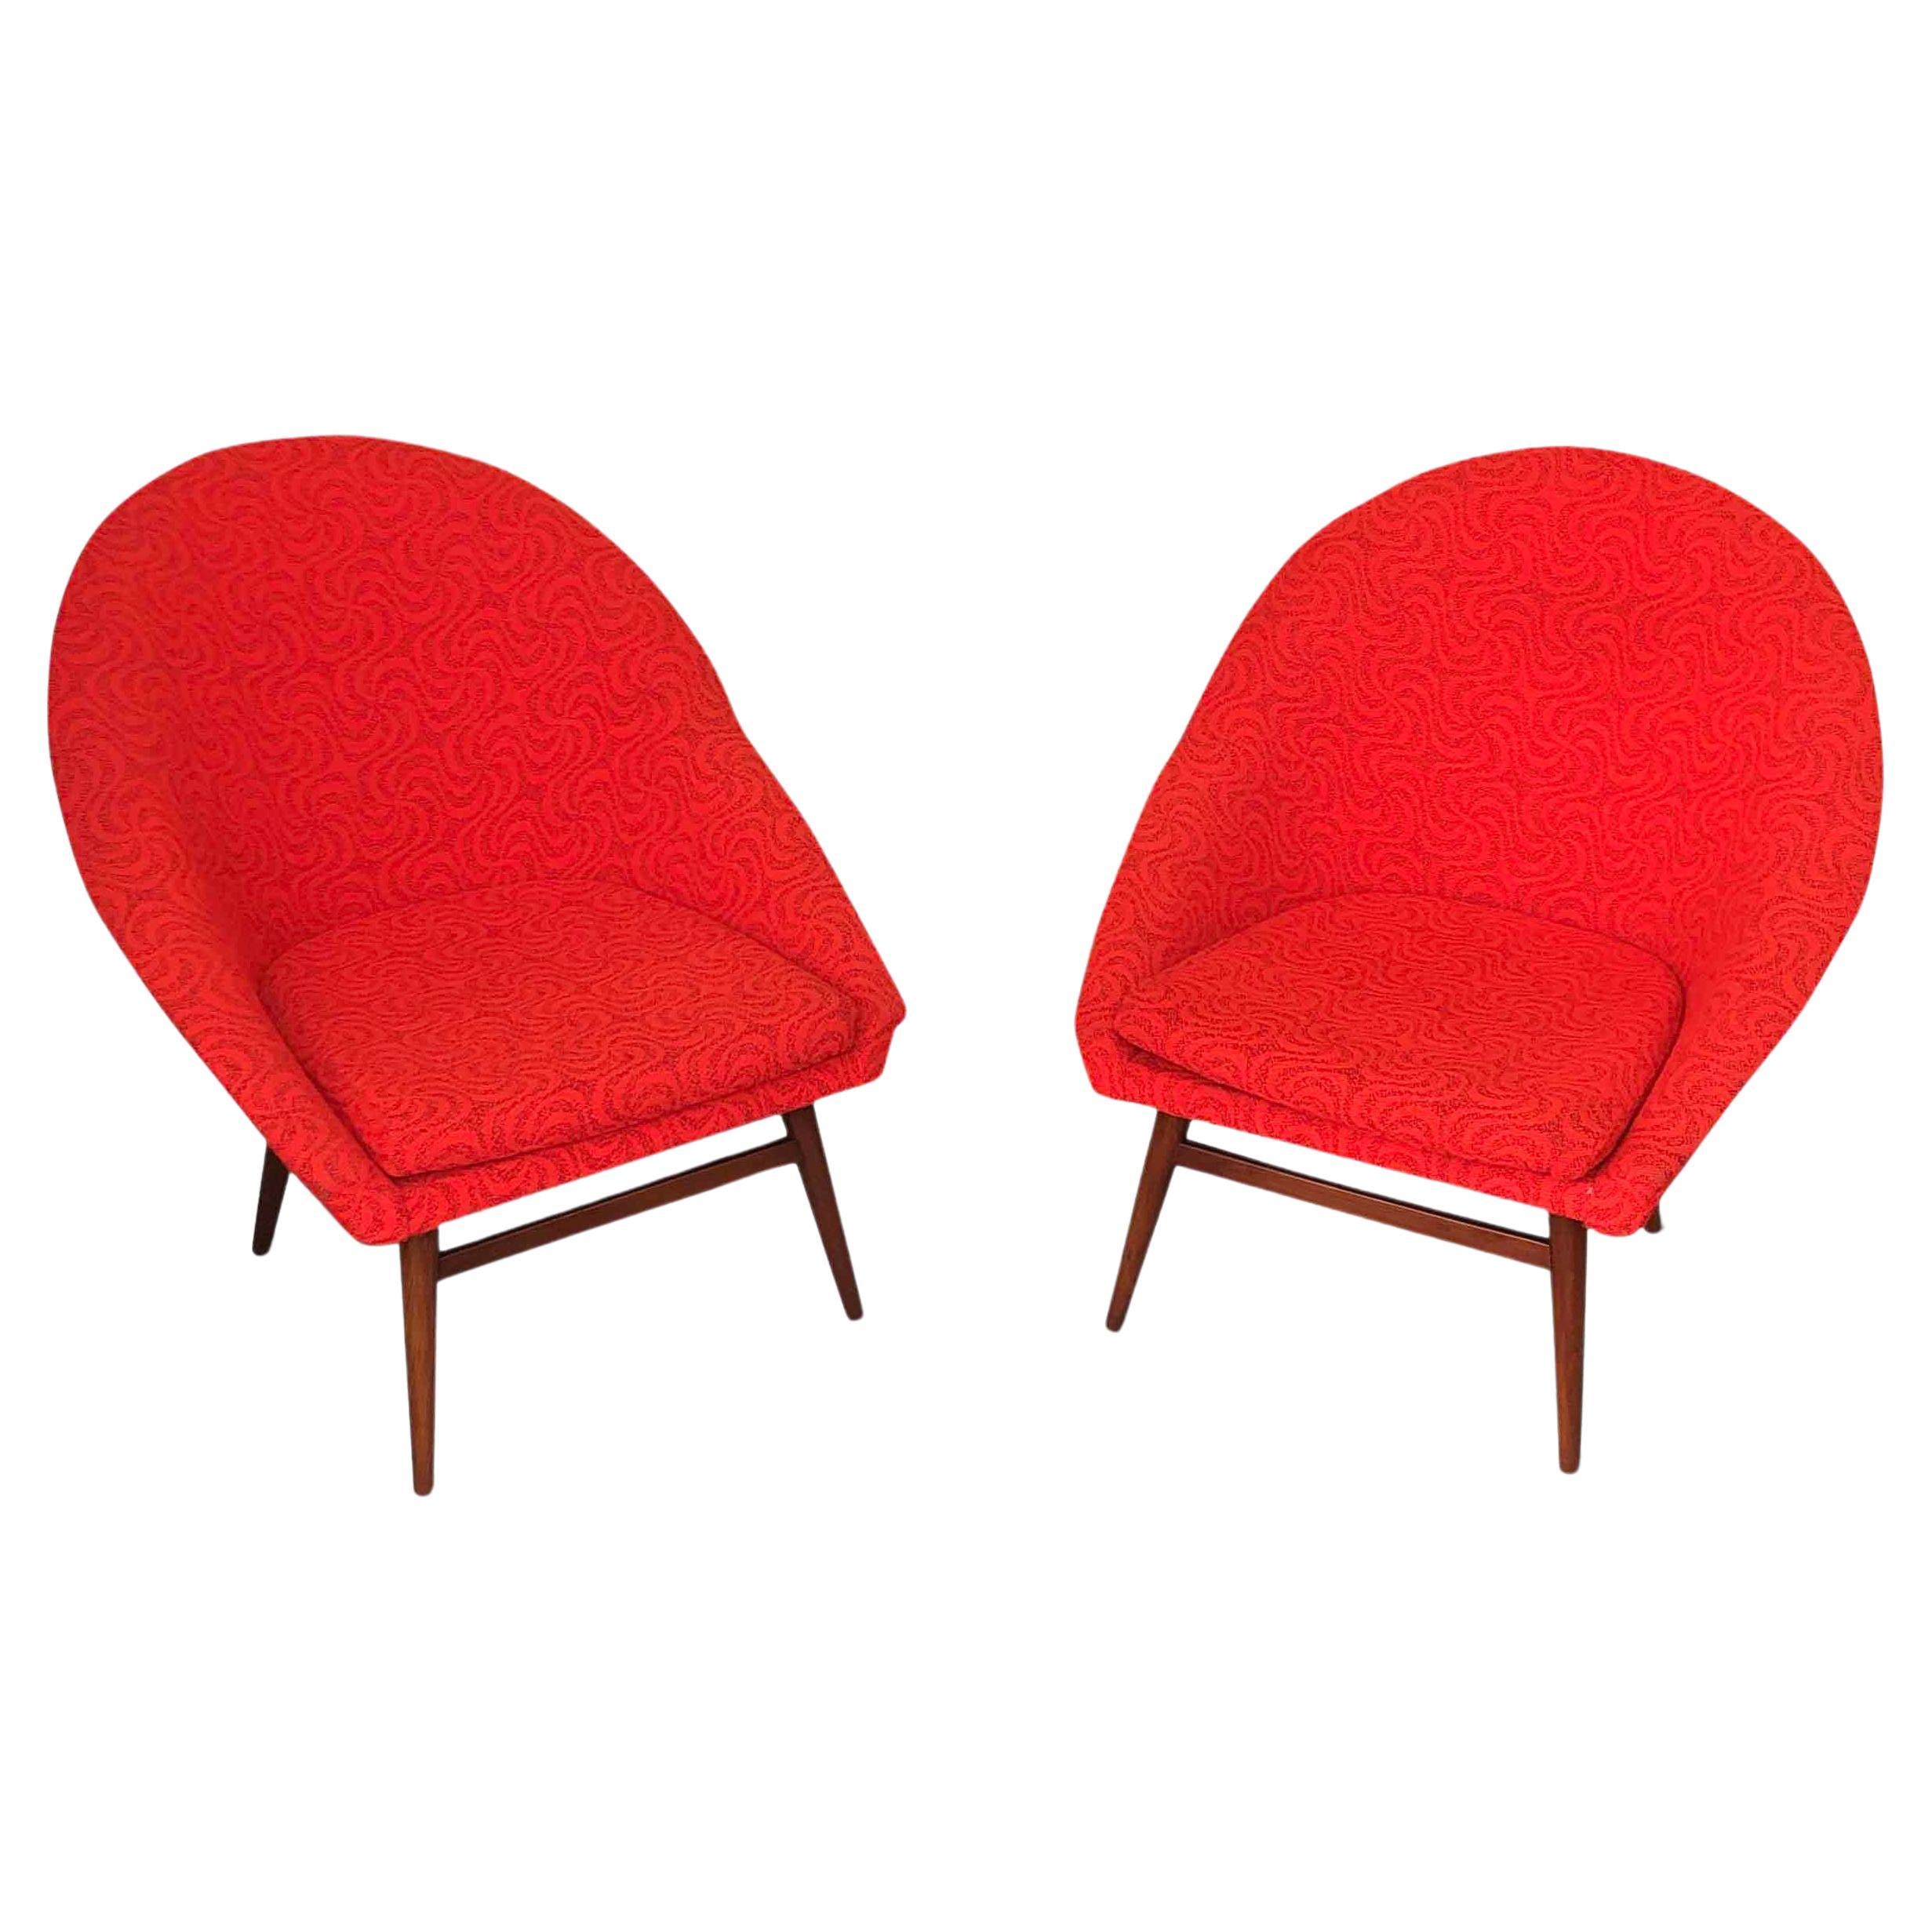 1960s Red Bucket Seats or Armchairs For Sale